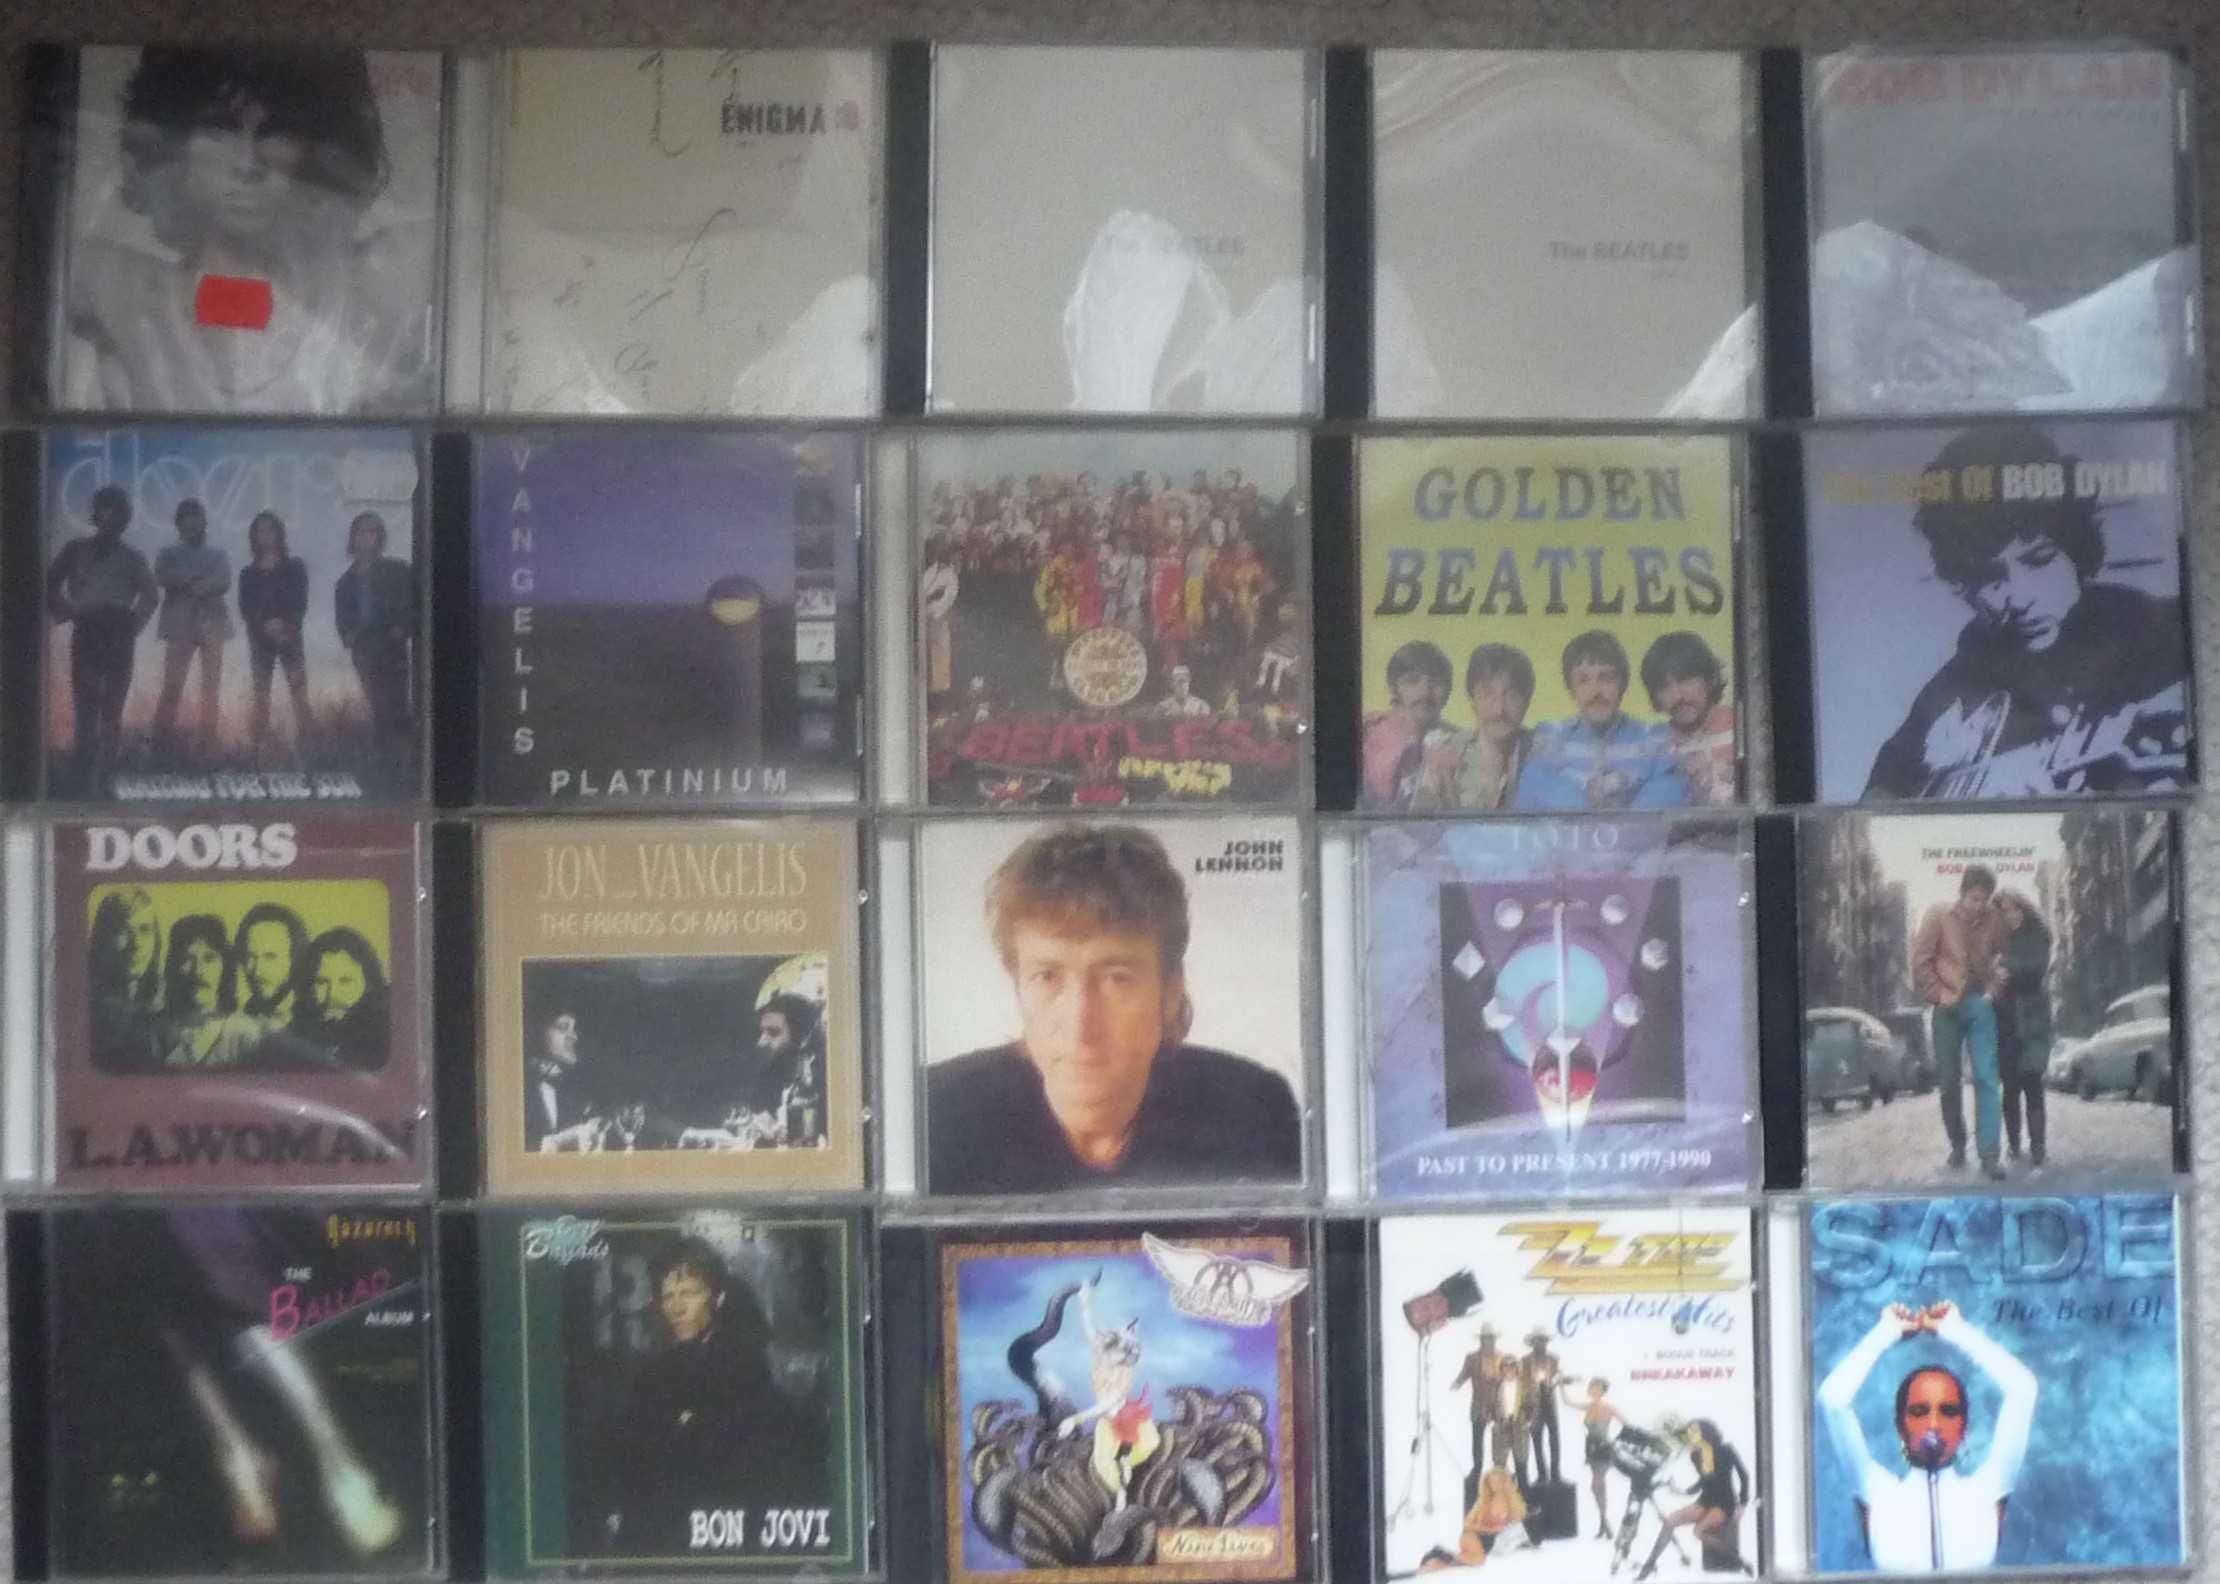 Pink Floyd, The Beatles, Jethro Tull, Enigma, Sting, Cars